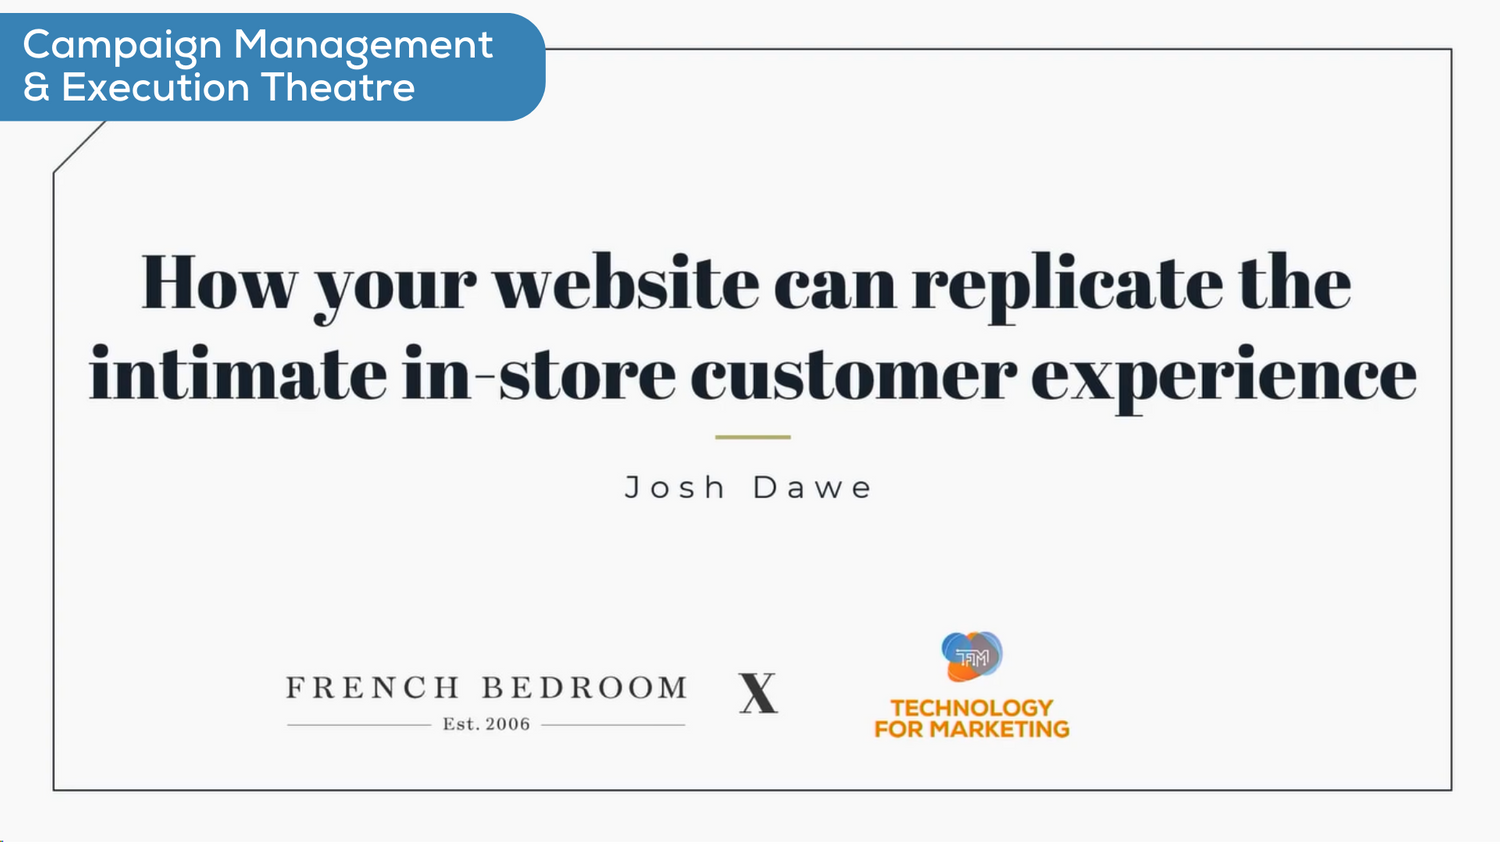 Elevating Your Website to Replicate the Intimate In-Store Experience